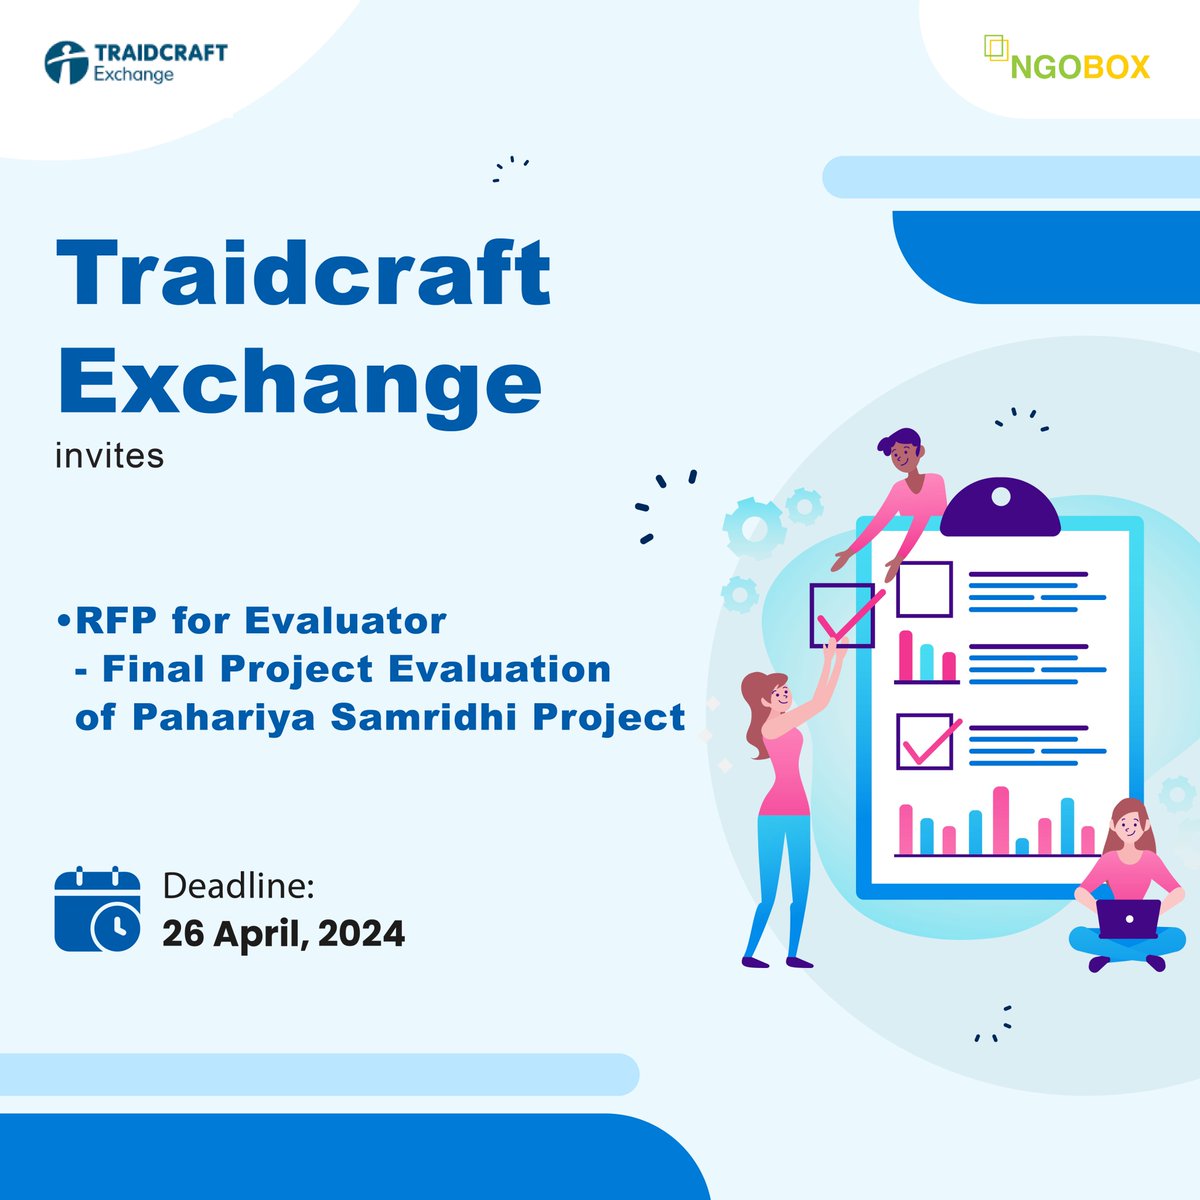 Traidcraft Exchange is inviting proposals for an Evaluator to conduct the Final Project Evaluation of the Pahariya Samridhi Project. Deadline: 26 April 2024 Apply here: [ngobox.org/full_rfp_eoi_T…] #RequestforProposal #PahariyaSamridhiProject #TraidcraftExchange